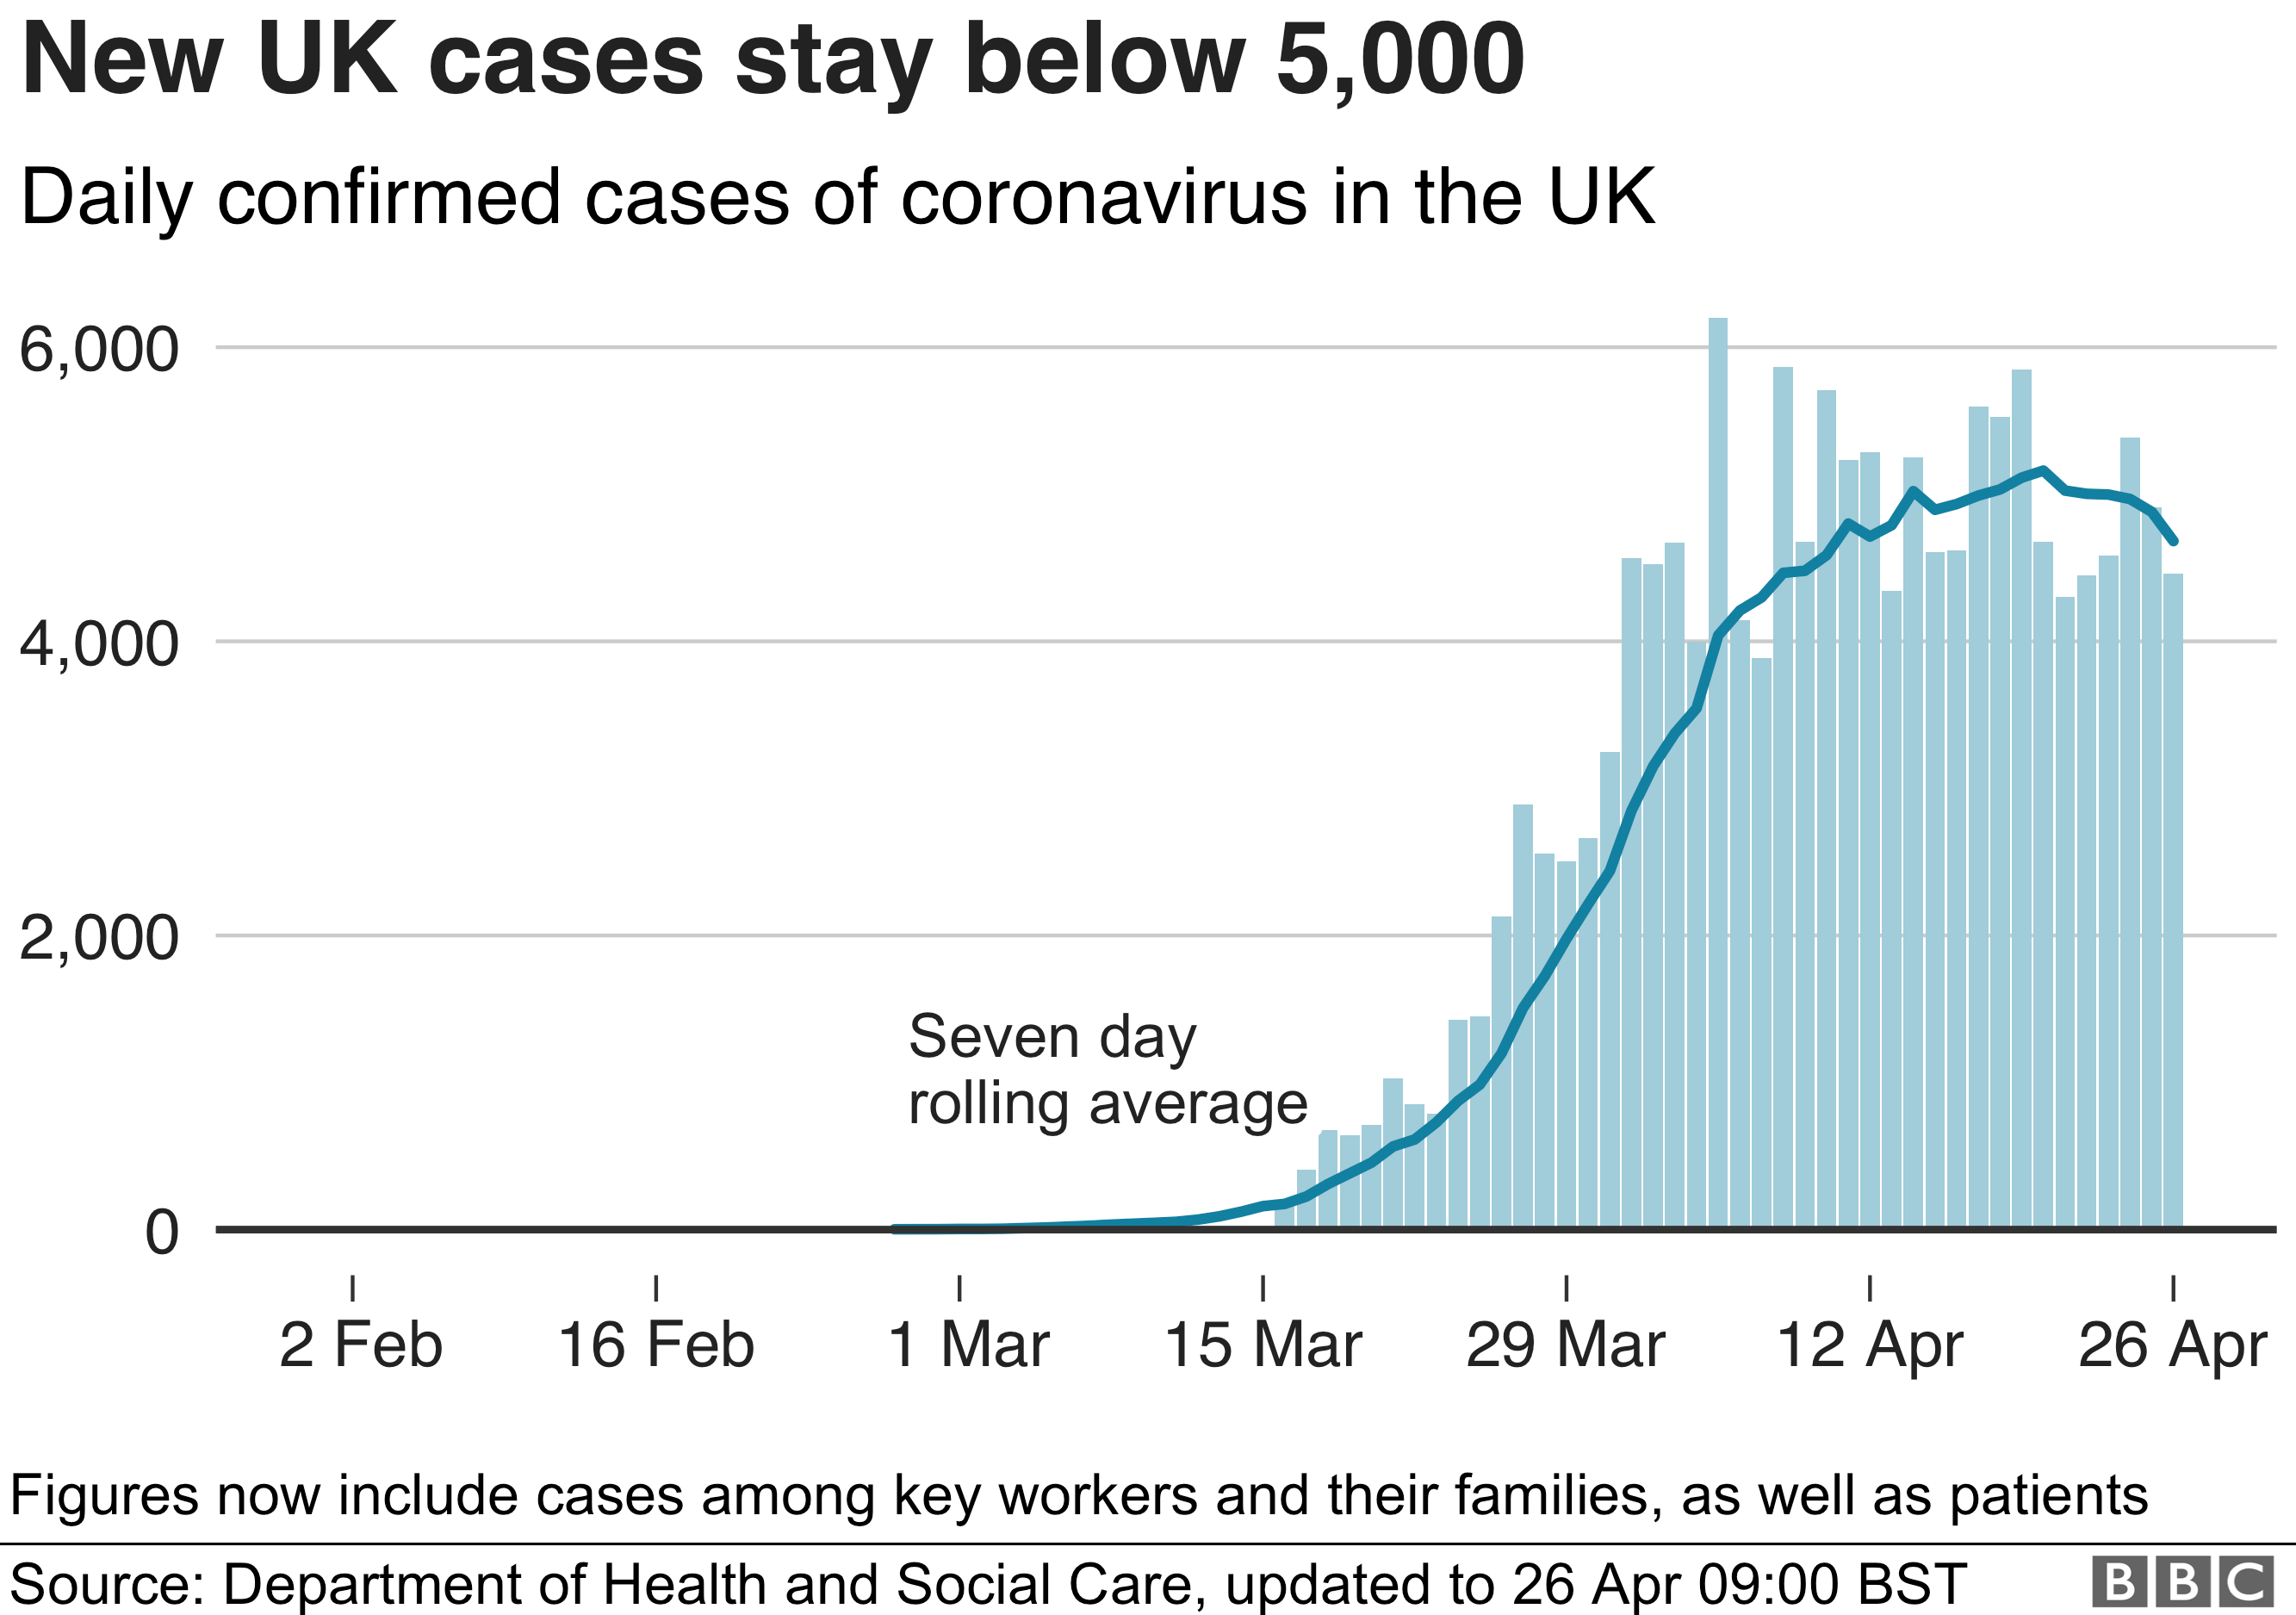 Chart showing number of new confirmed cases of coronavirus in the UK has dipped below 5,000 for 5 of the last six days